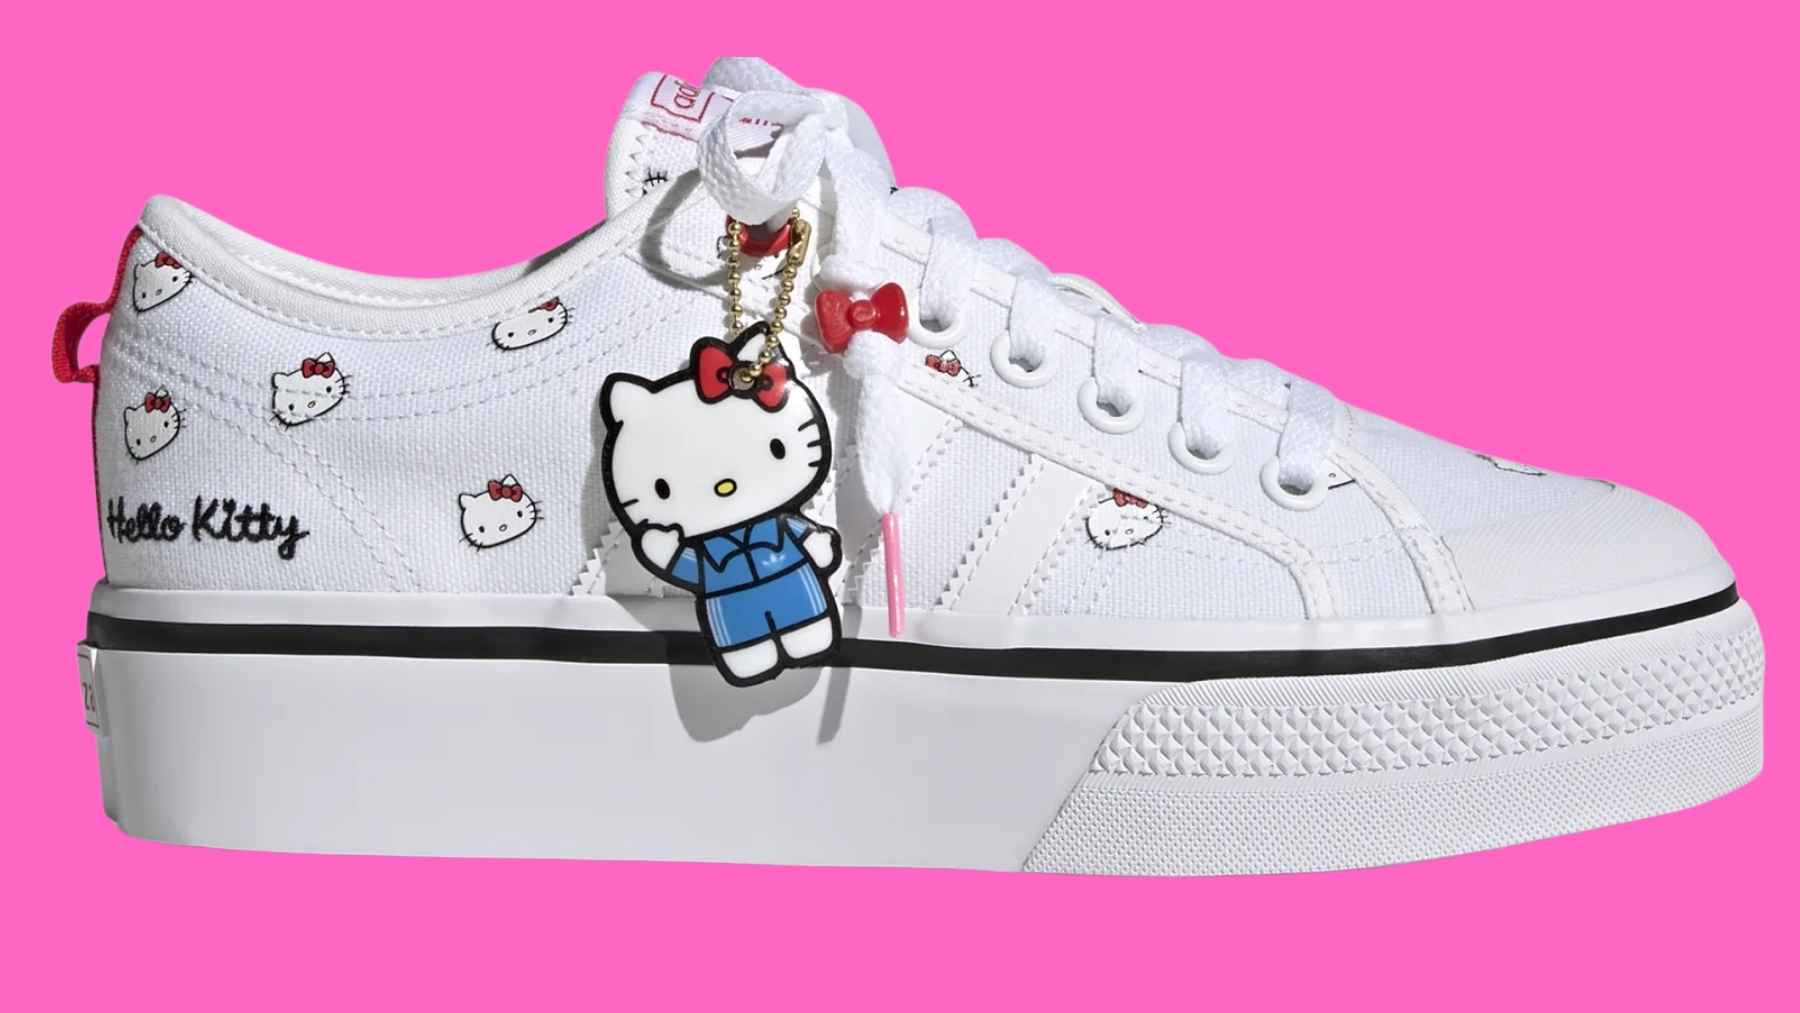 The Adidas platform shoes for Hello Kitty fans that you will always